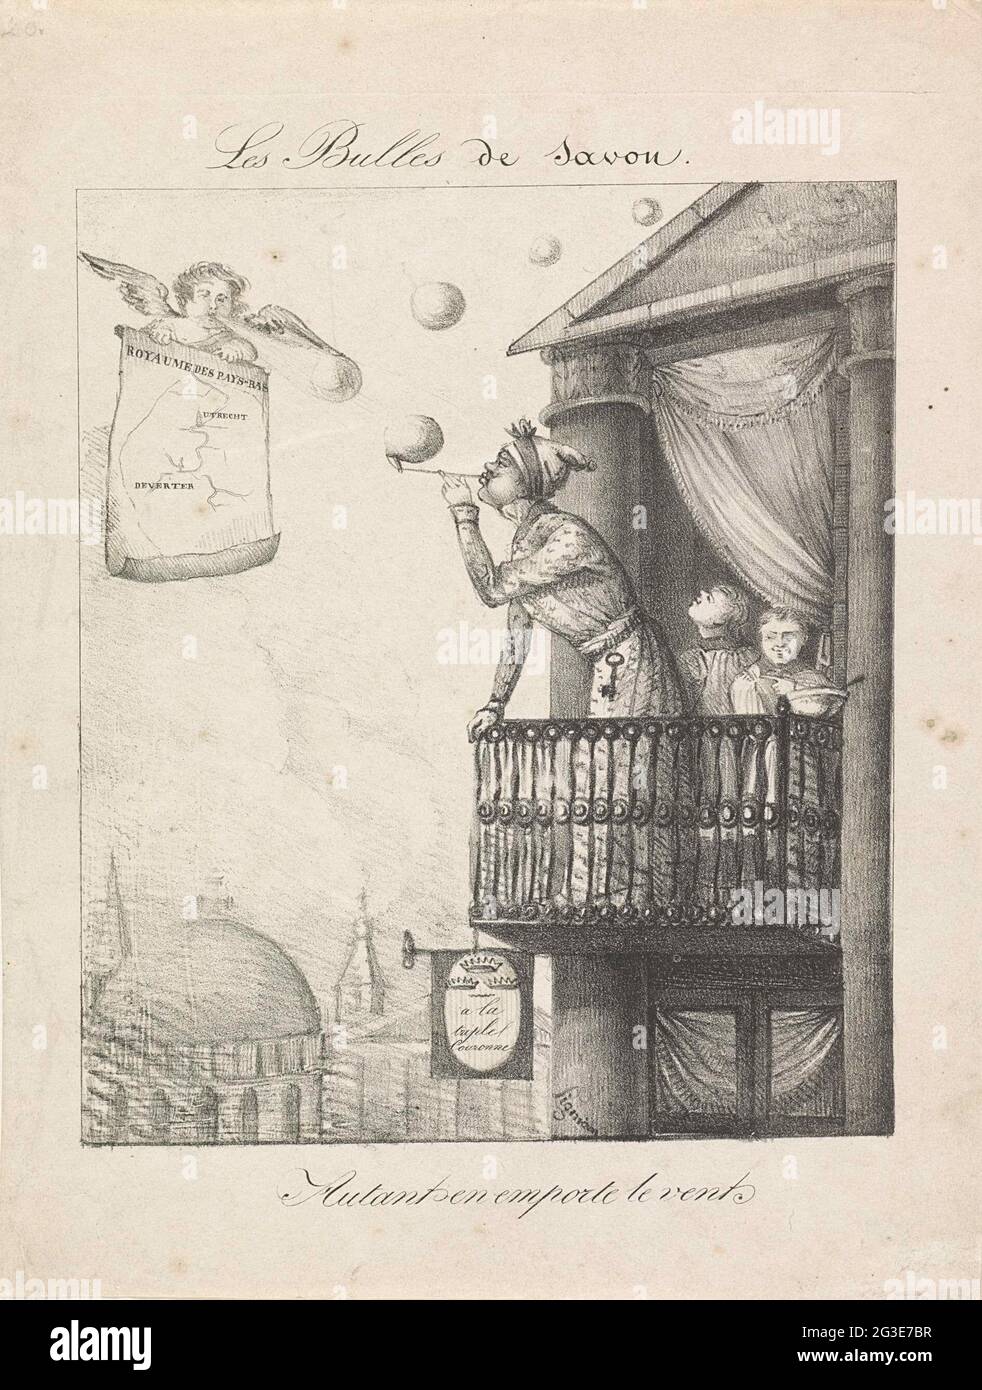 Cartoon on the papal bulls against the appointment of so-called Jansenists bishops, 1825; Les Bulles De Savon / Autant and Emporte Le Vent. Cartoon on the papal bulls against the appointment of the so-called Jansenists Bishops Wilhelmus Vet in Deventer and Johannes van Santen in Utrecht in 1825. A man in the dresser blows from his balcony in Rome soap bubbles in the air. In the sky an angel blows with a map of the Netherlands, on which only Utrecht and Deventer are indicated, the soap bubbles returned. Stock Photo